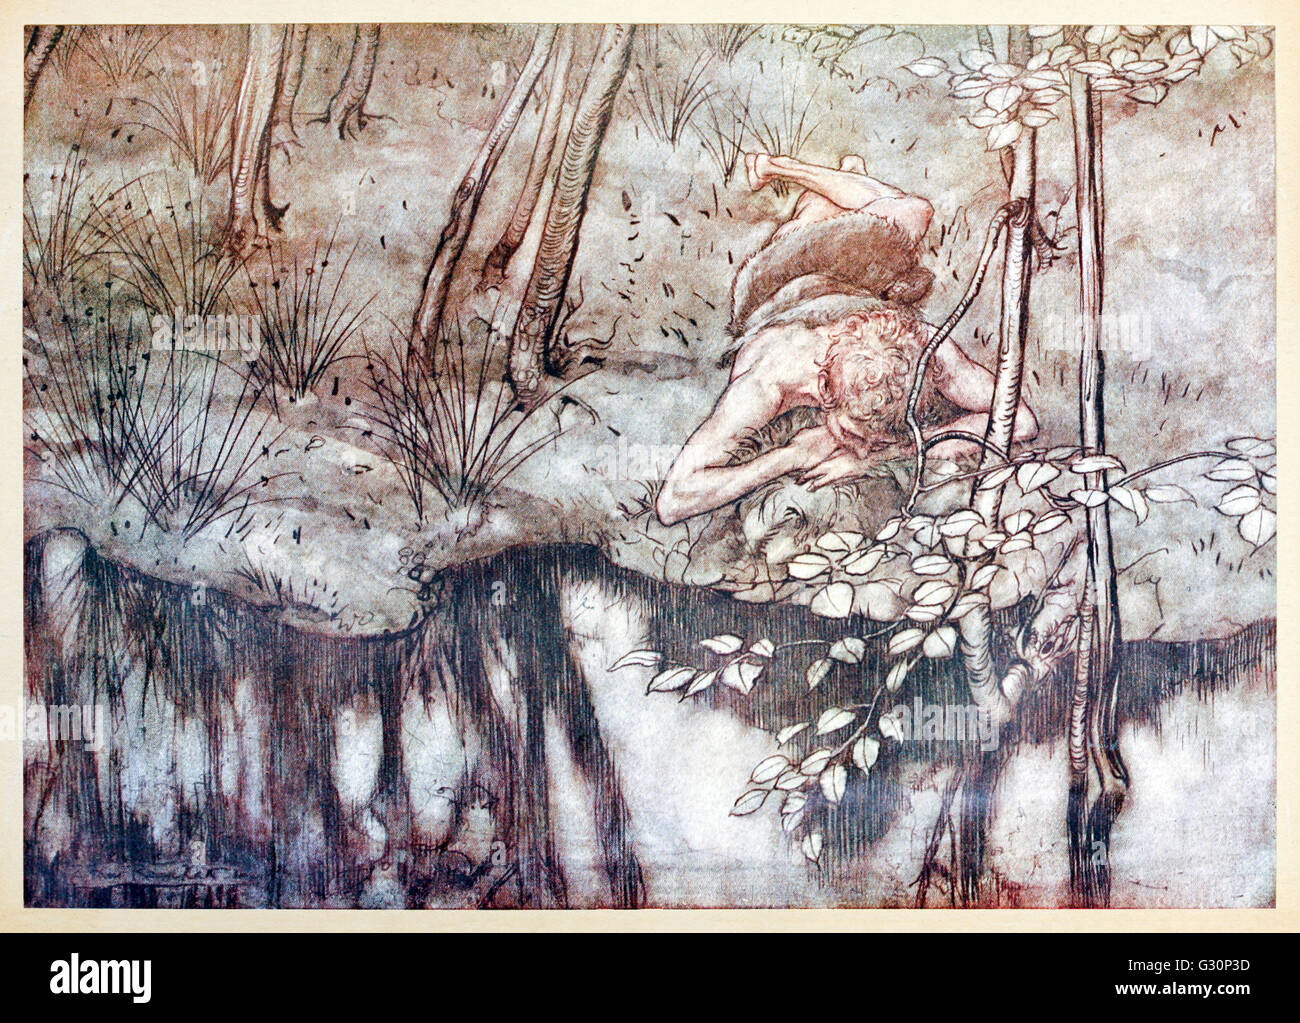 “Siegfried sees himself in the stream” from 'Siegfried & The Twilight of the Gods' illustrated by Arthur Rackham (1867-1939). See description for more information. Stock Photo